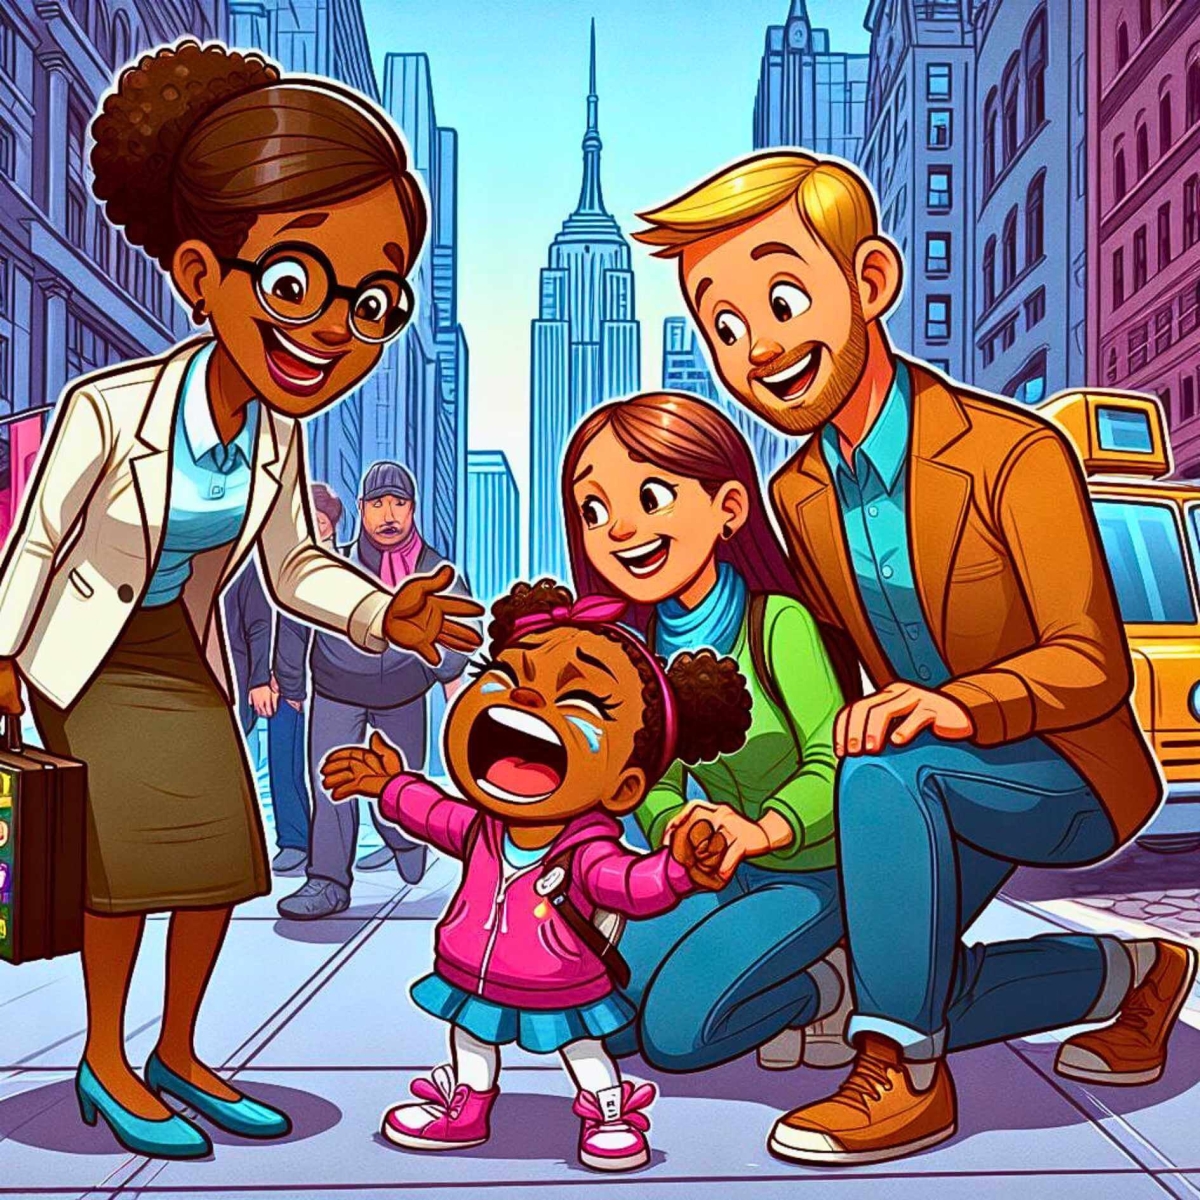 An experienced tour guide in New York City is attentively taking care of a small black girl who is having a meltdown due to being tired and hungry on a city tour with her parents.